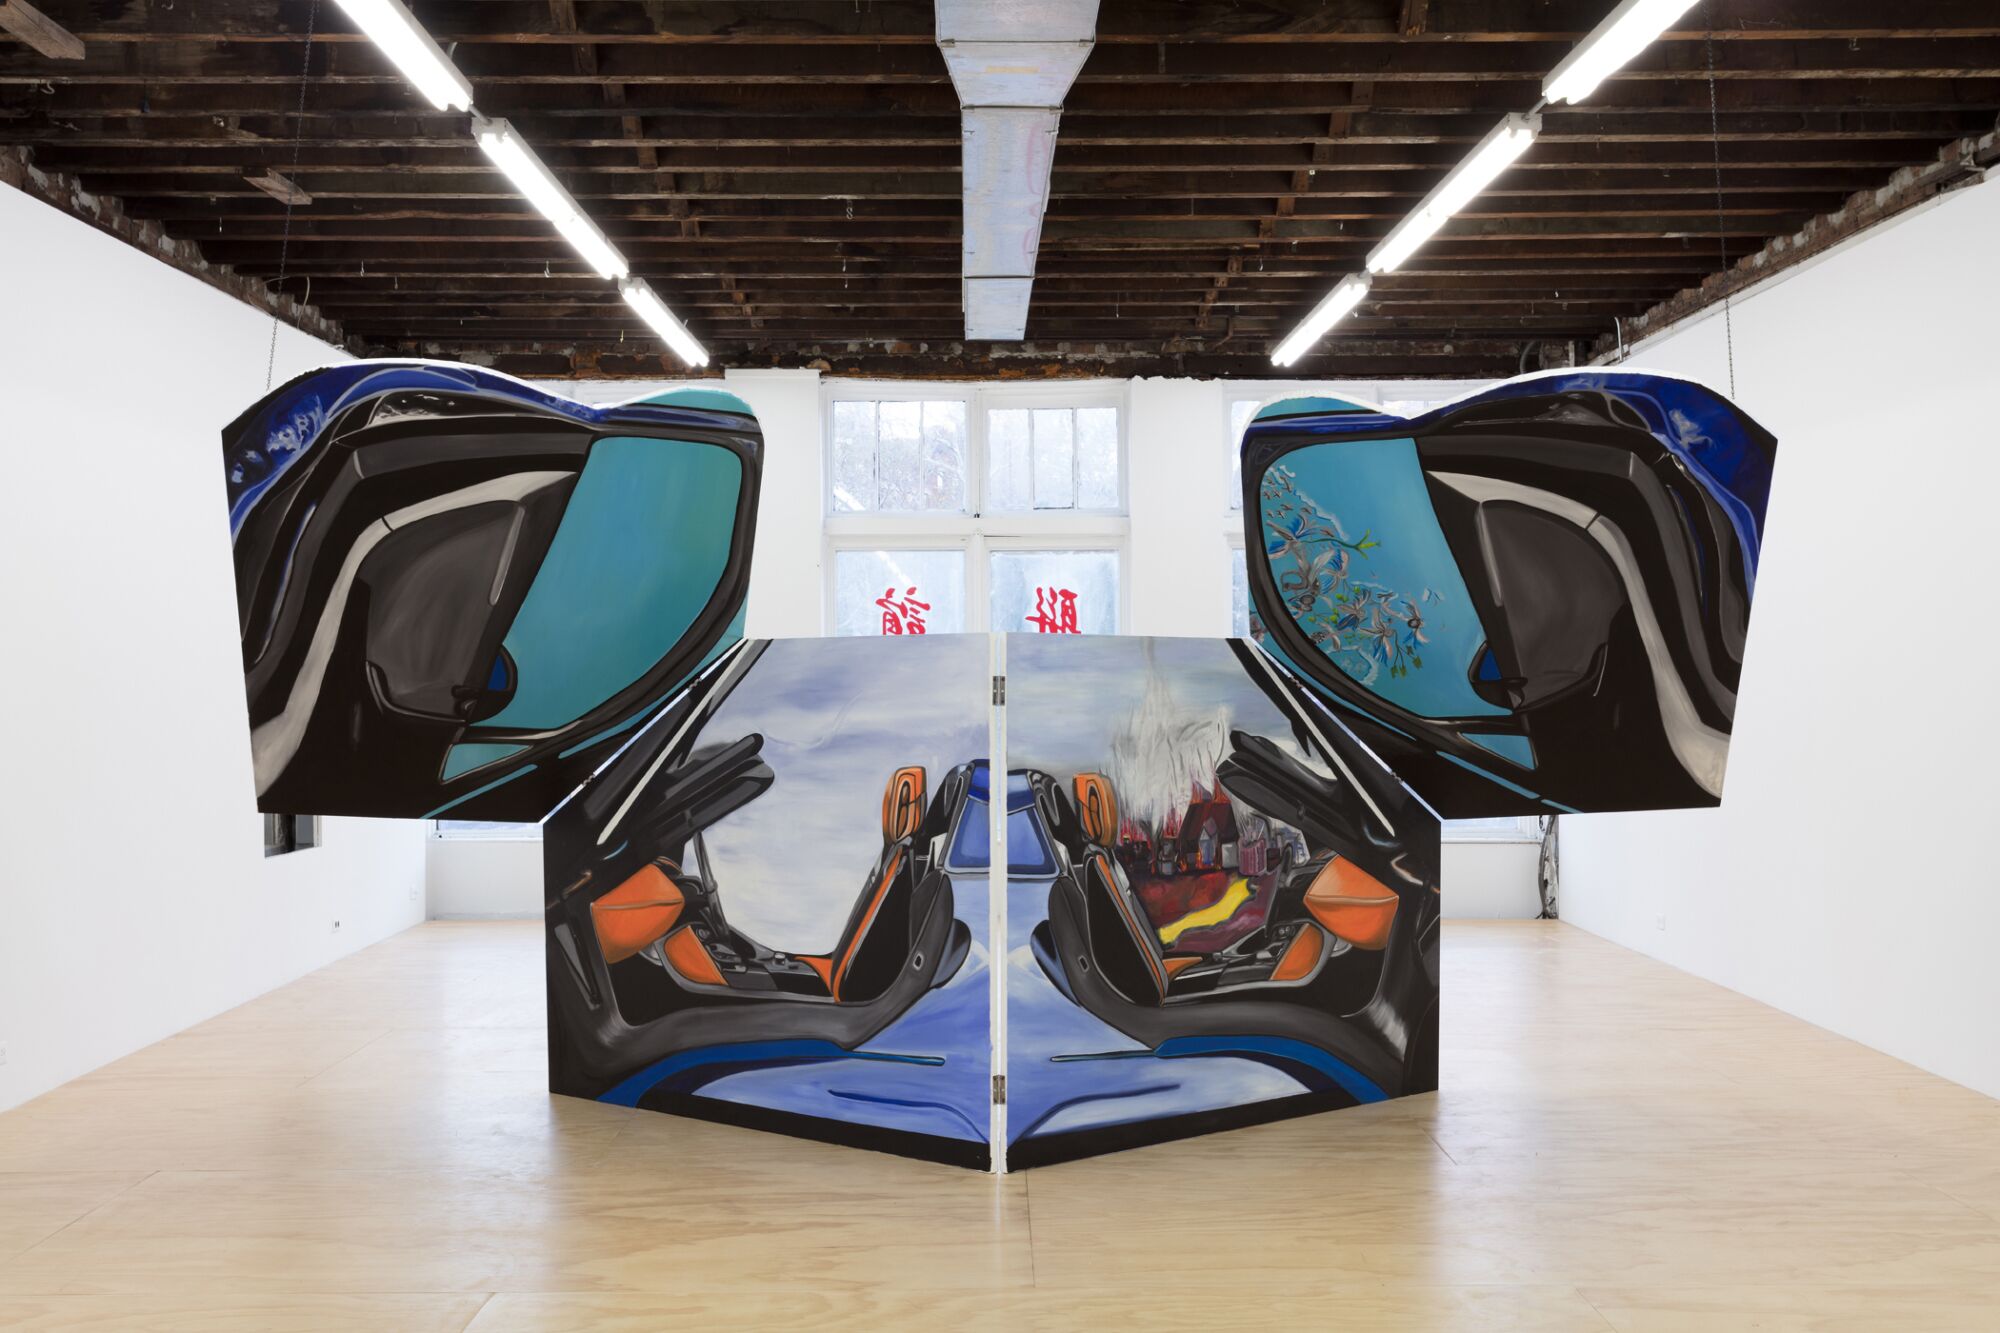 Four canvases hinged to one another evoke the interior of a sports car with winged doors.